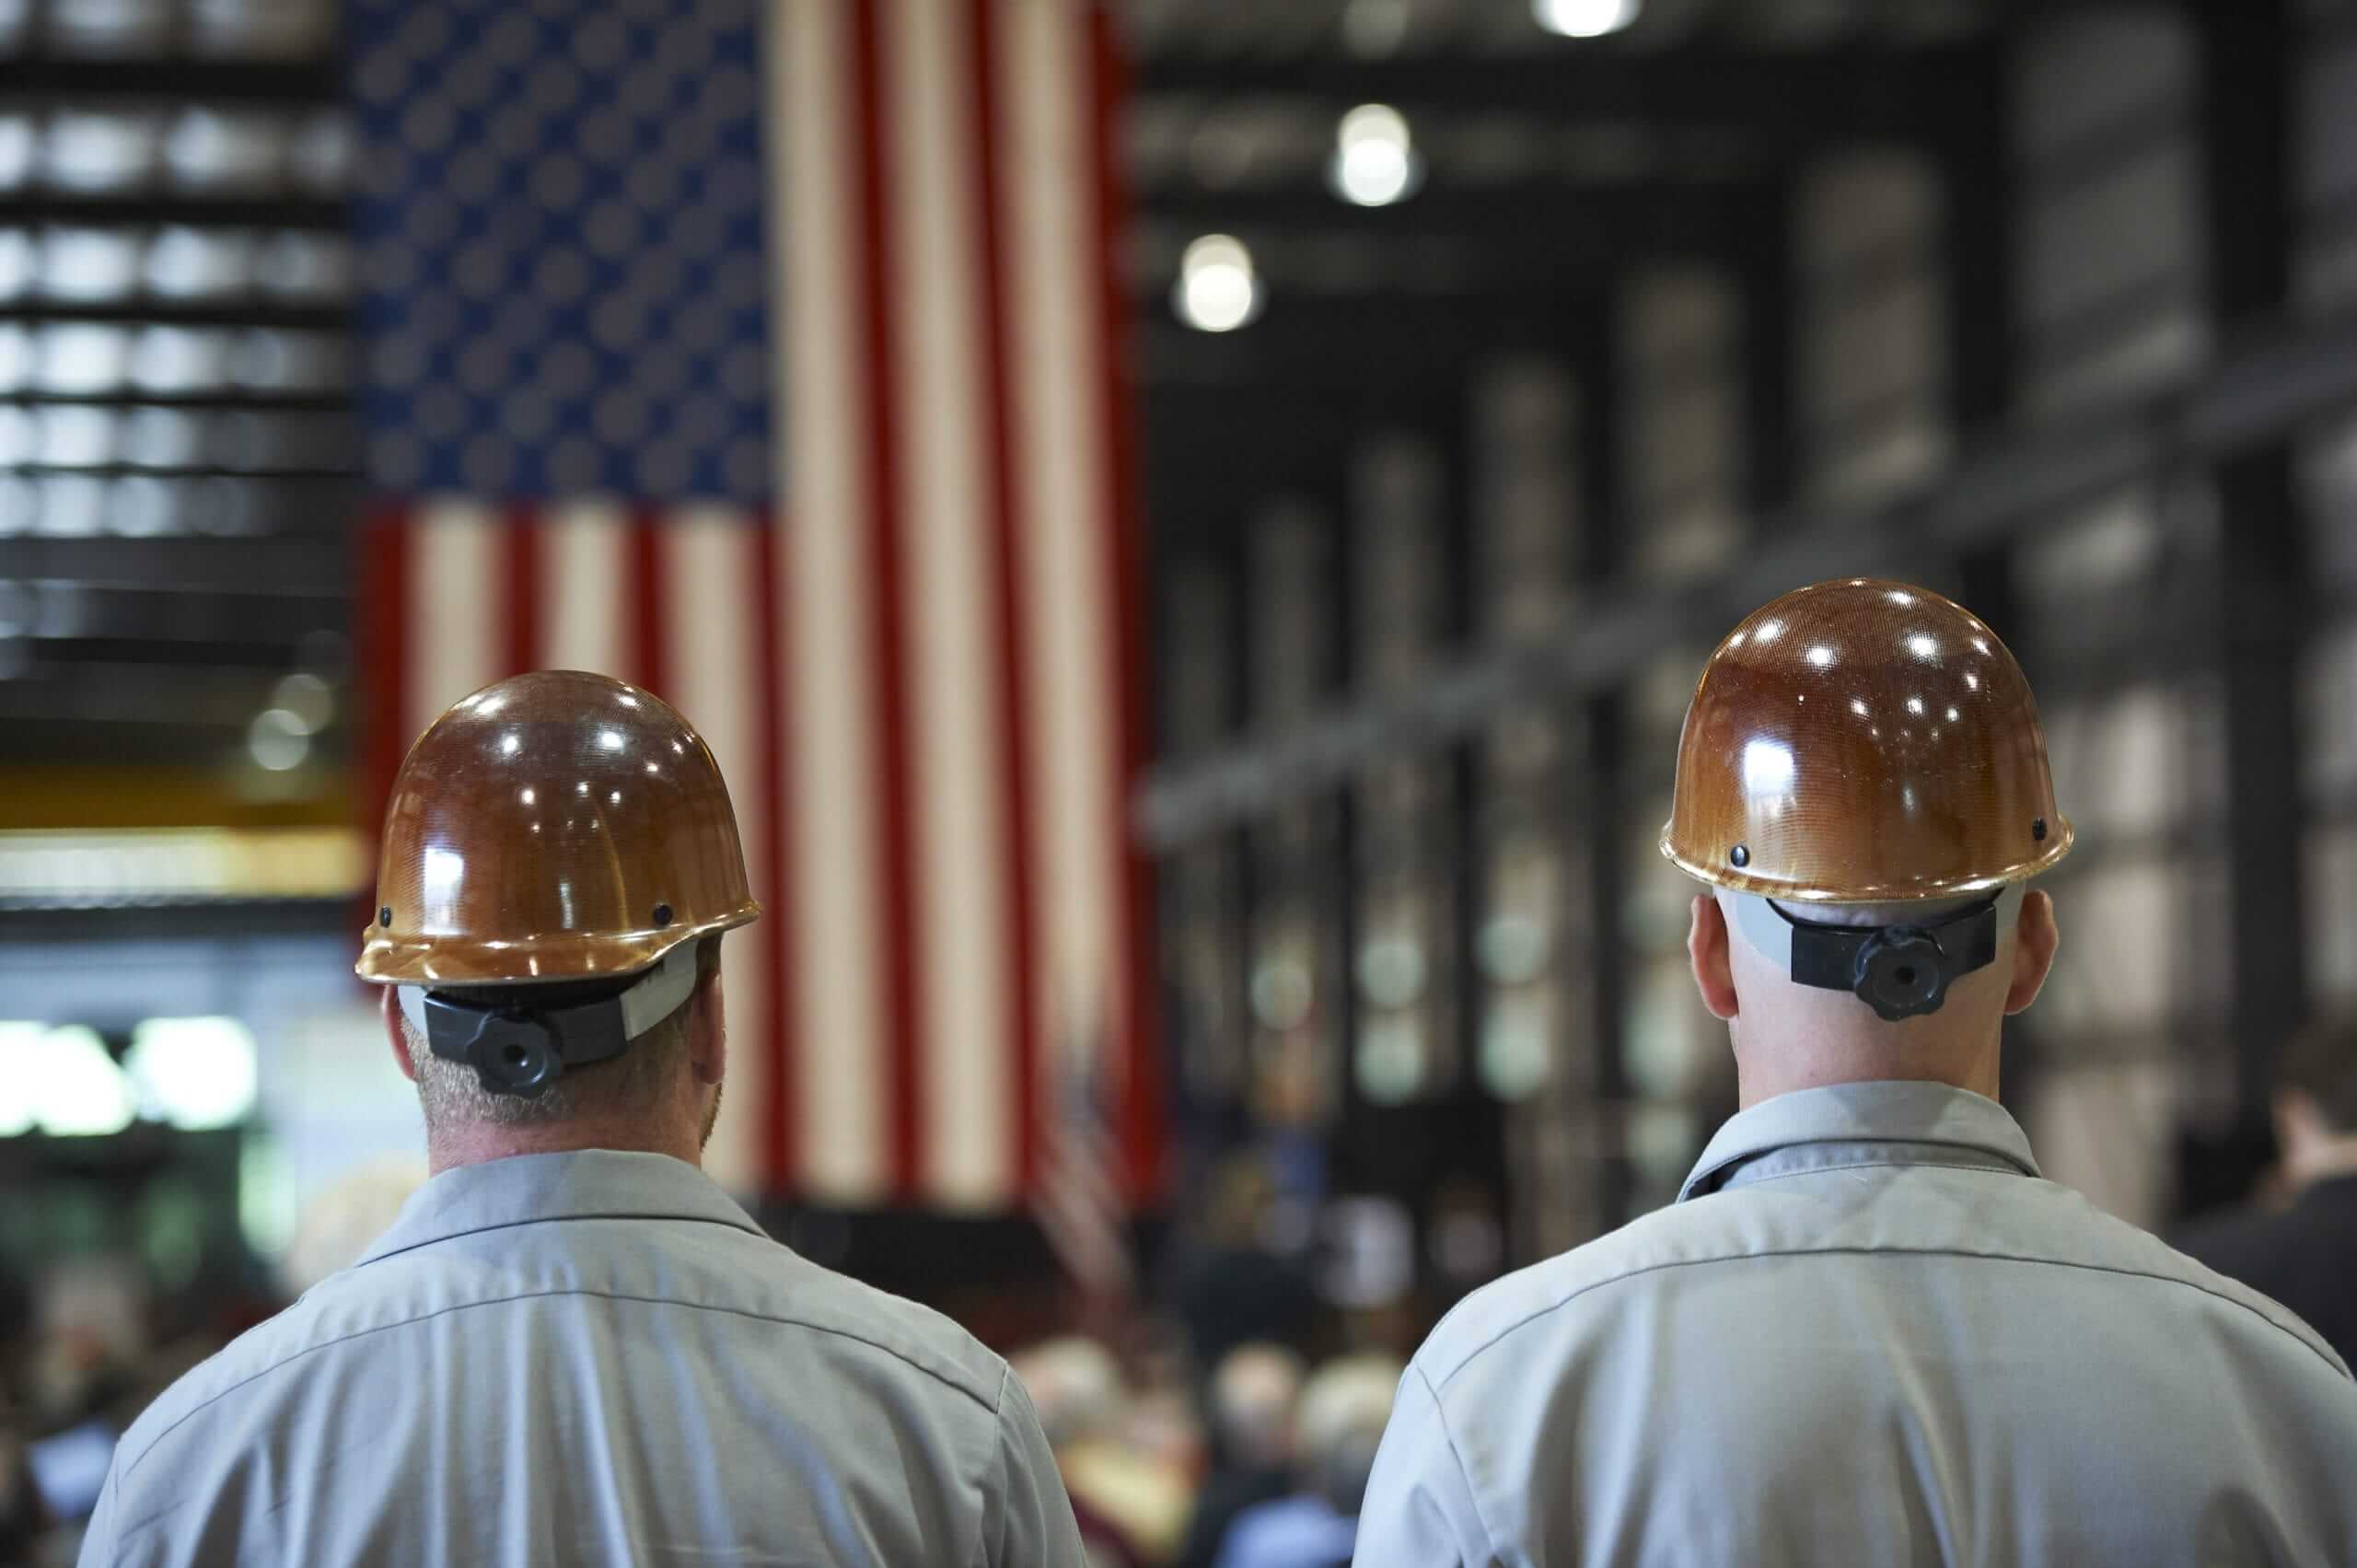 A photo of two men from the back wearing hard hats while looking at the American flag.